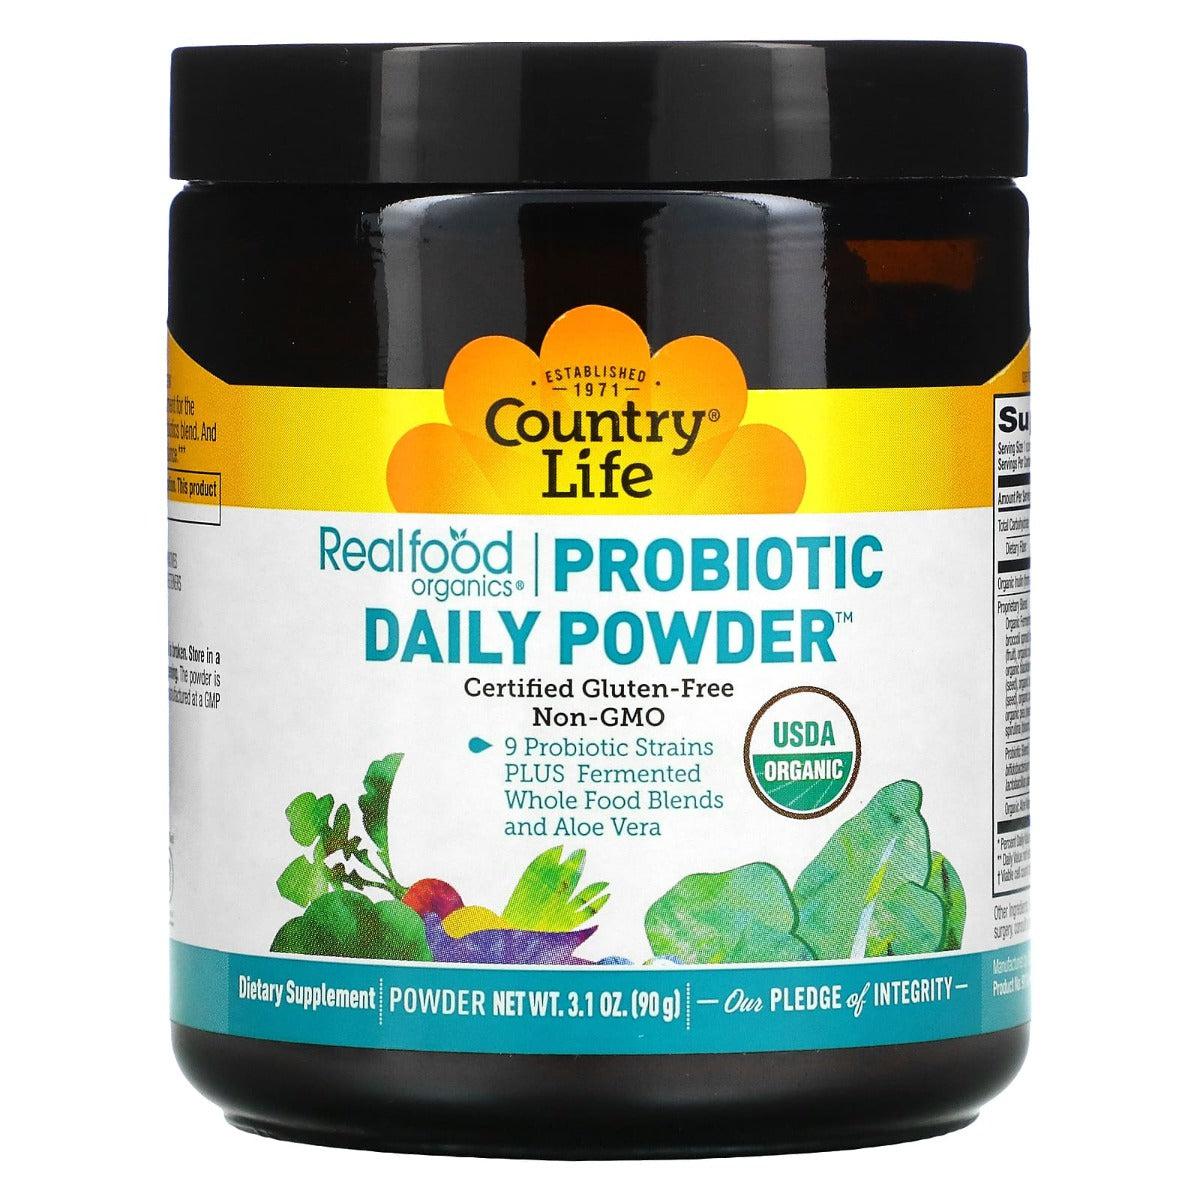 Country Life Realfood Organic Probiotic Daily Powder Gluten Free Non-GMO 90g